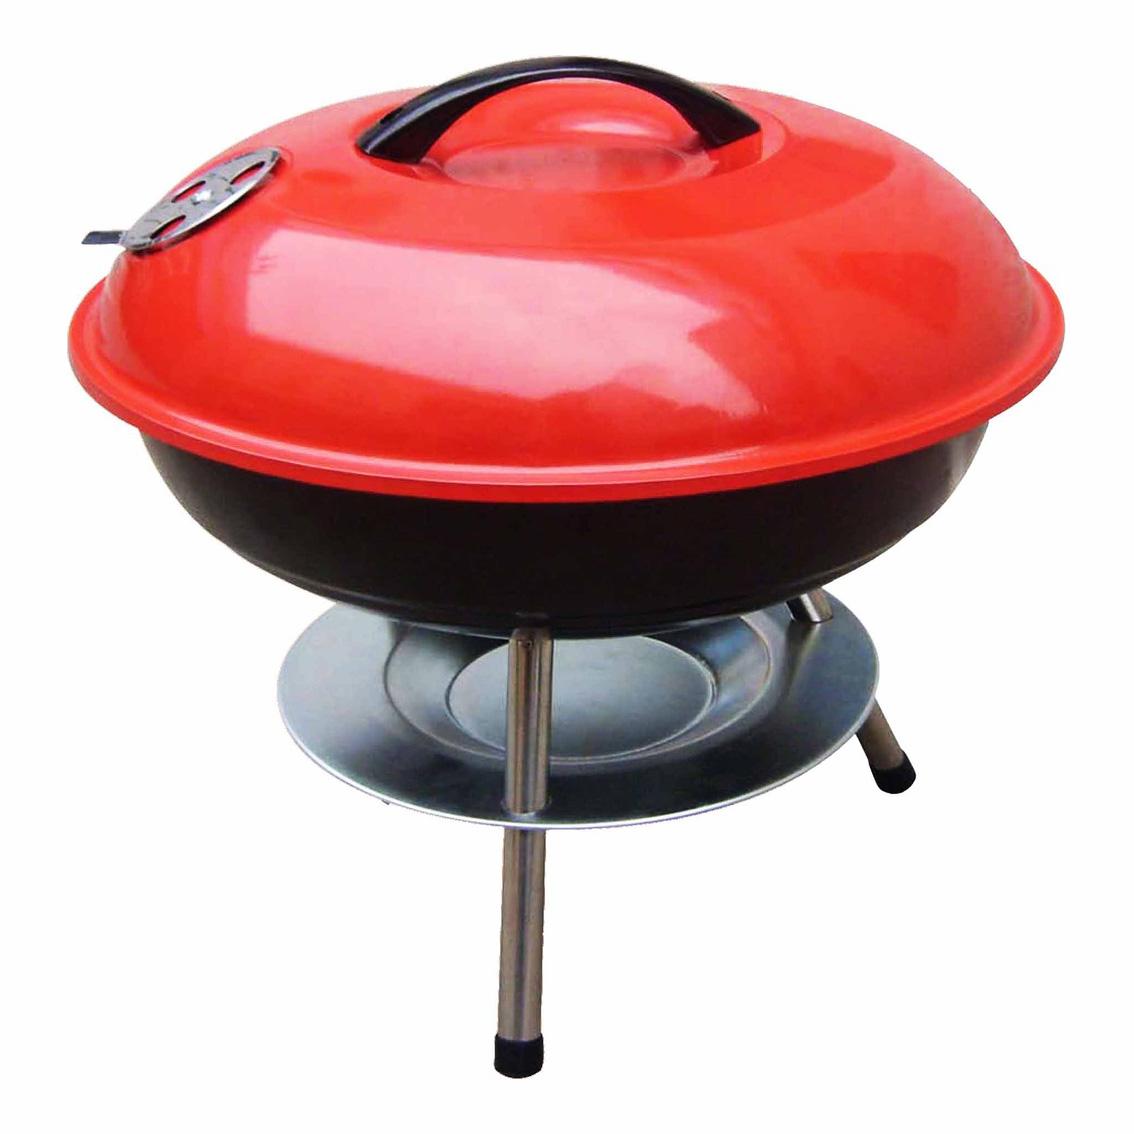 [NY.1114] Chrome Plated Charcoal Barbeque Grill Bbq Multicolor